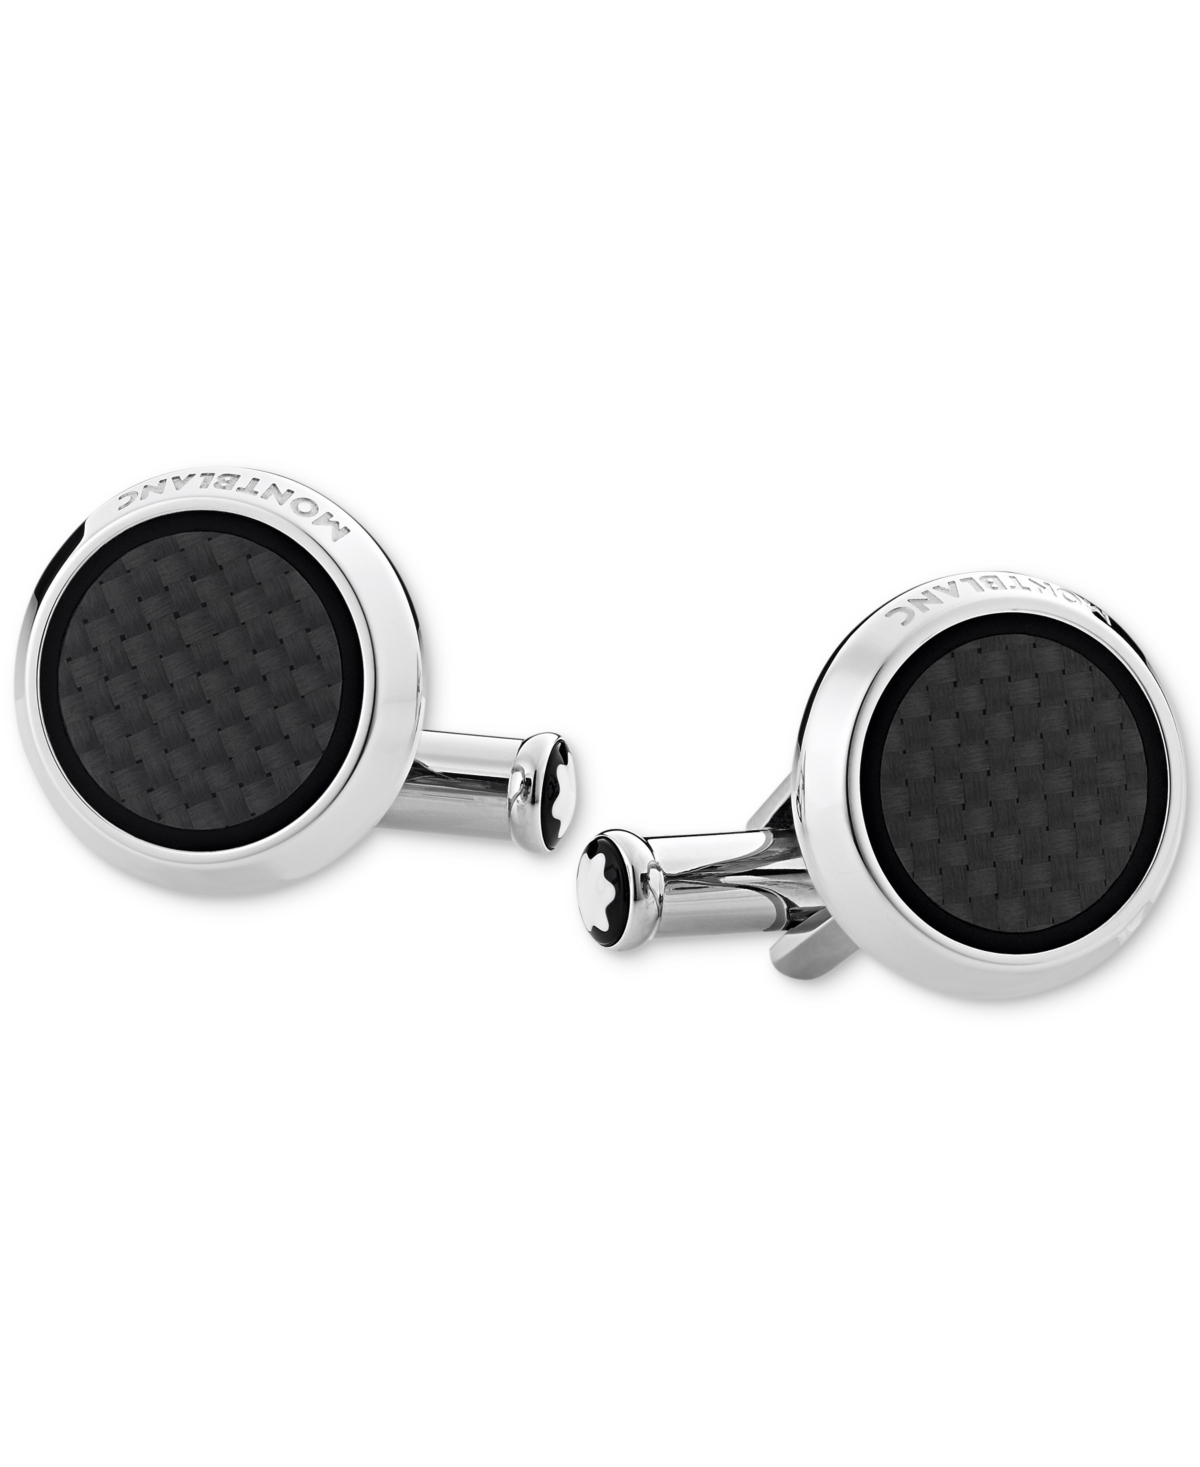 Montblanc Men's Inlay Cuff Links In No Color